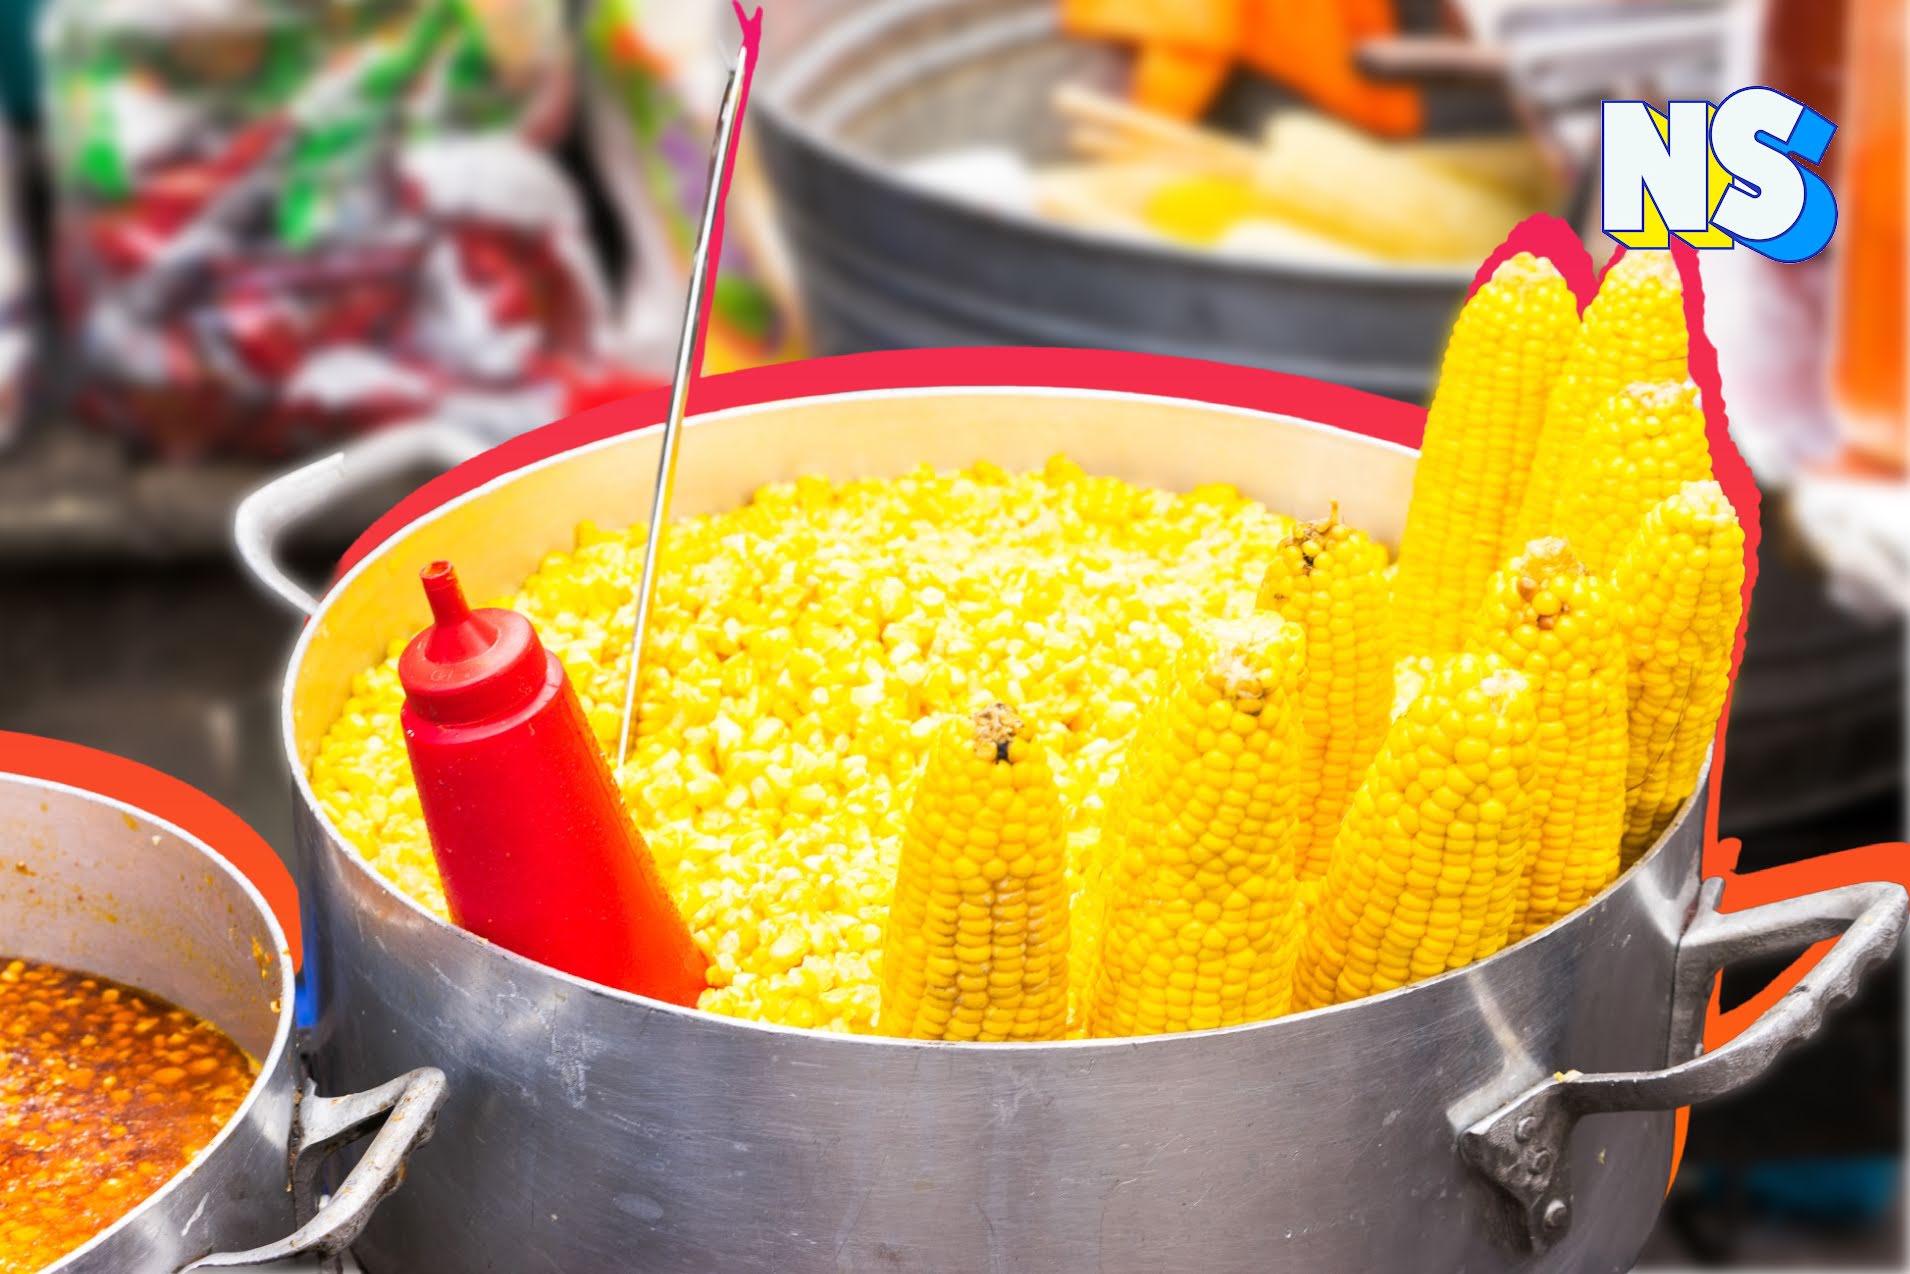 How Messy Do You Want It? The Elote vs Esquites Debate